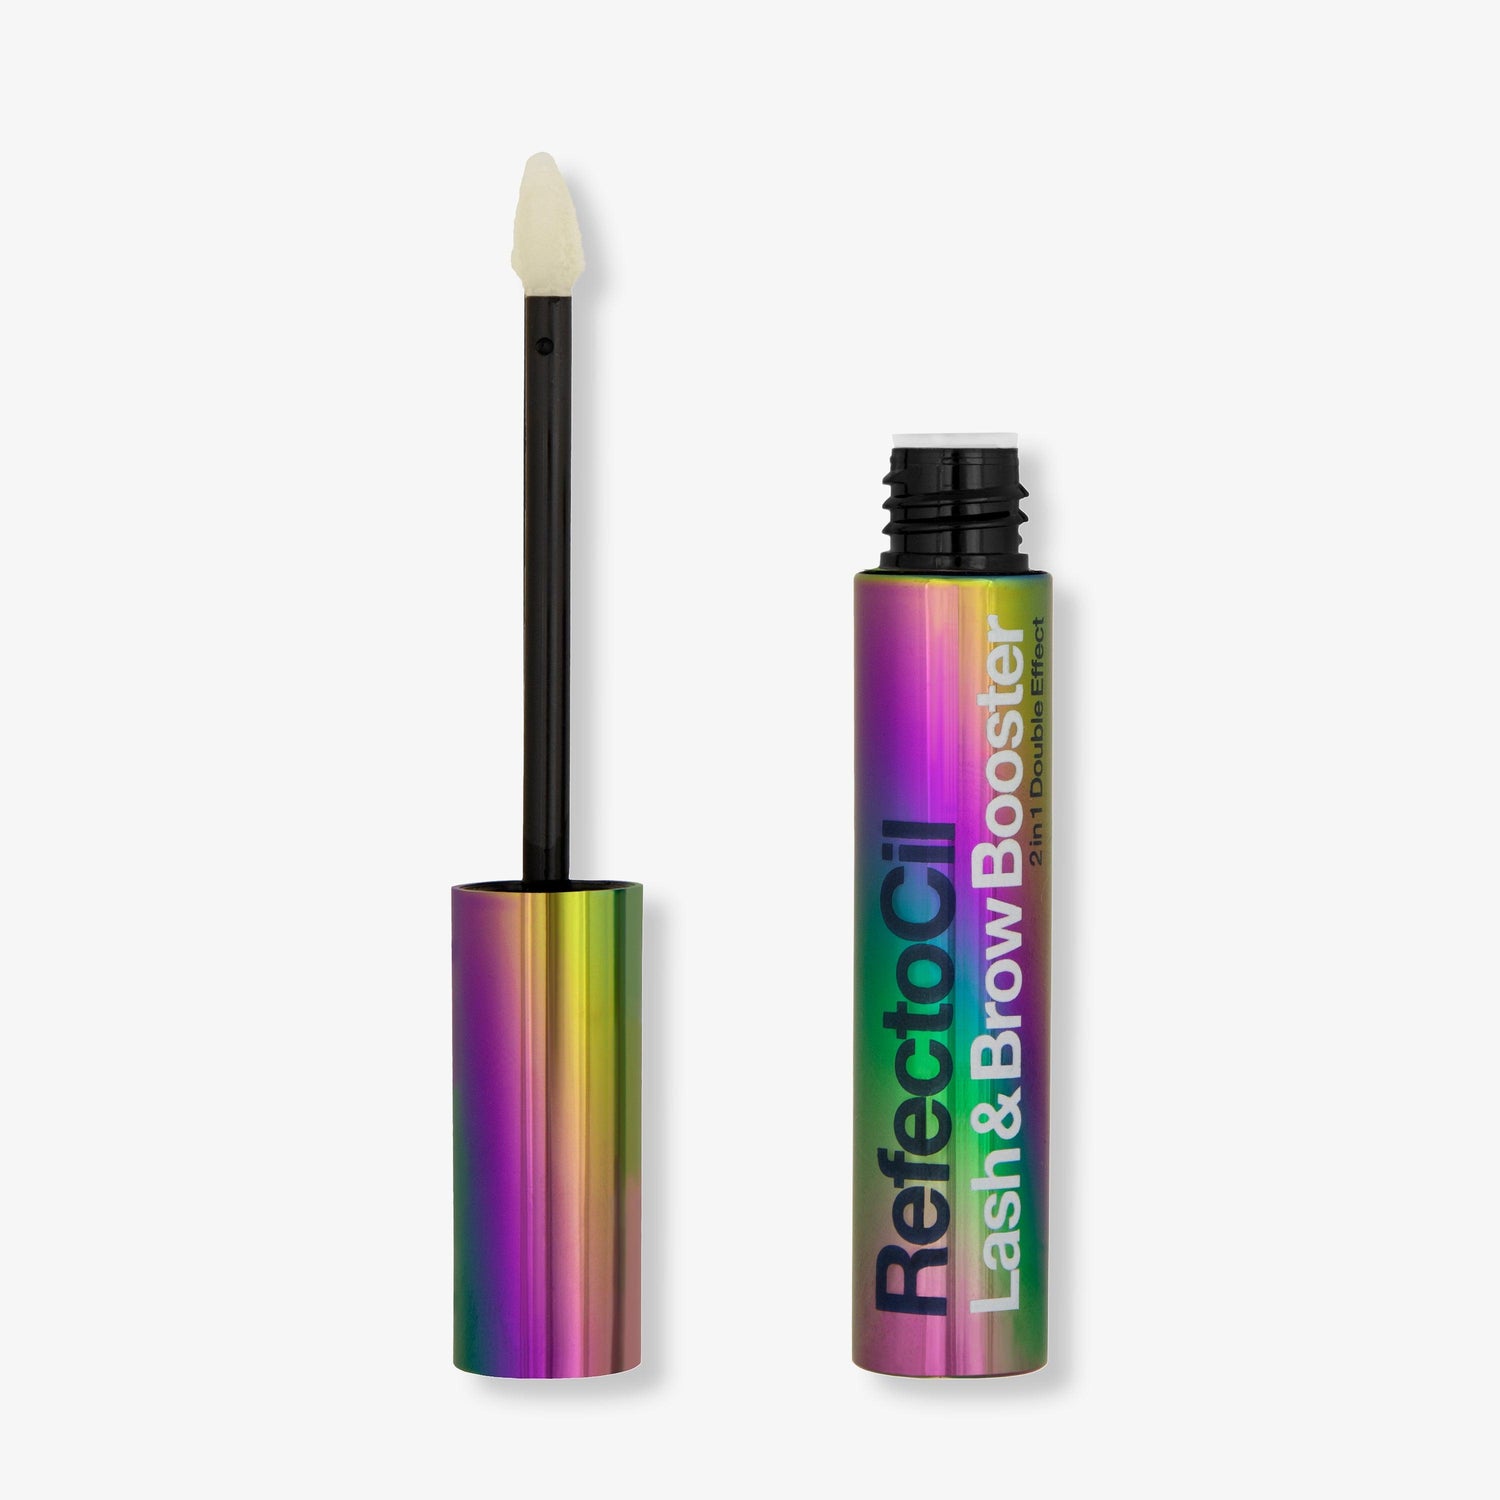 Refectocil lash and brow booster wimperserum - SerumGeeks